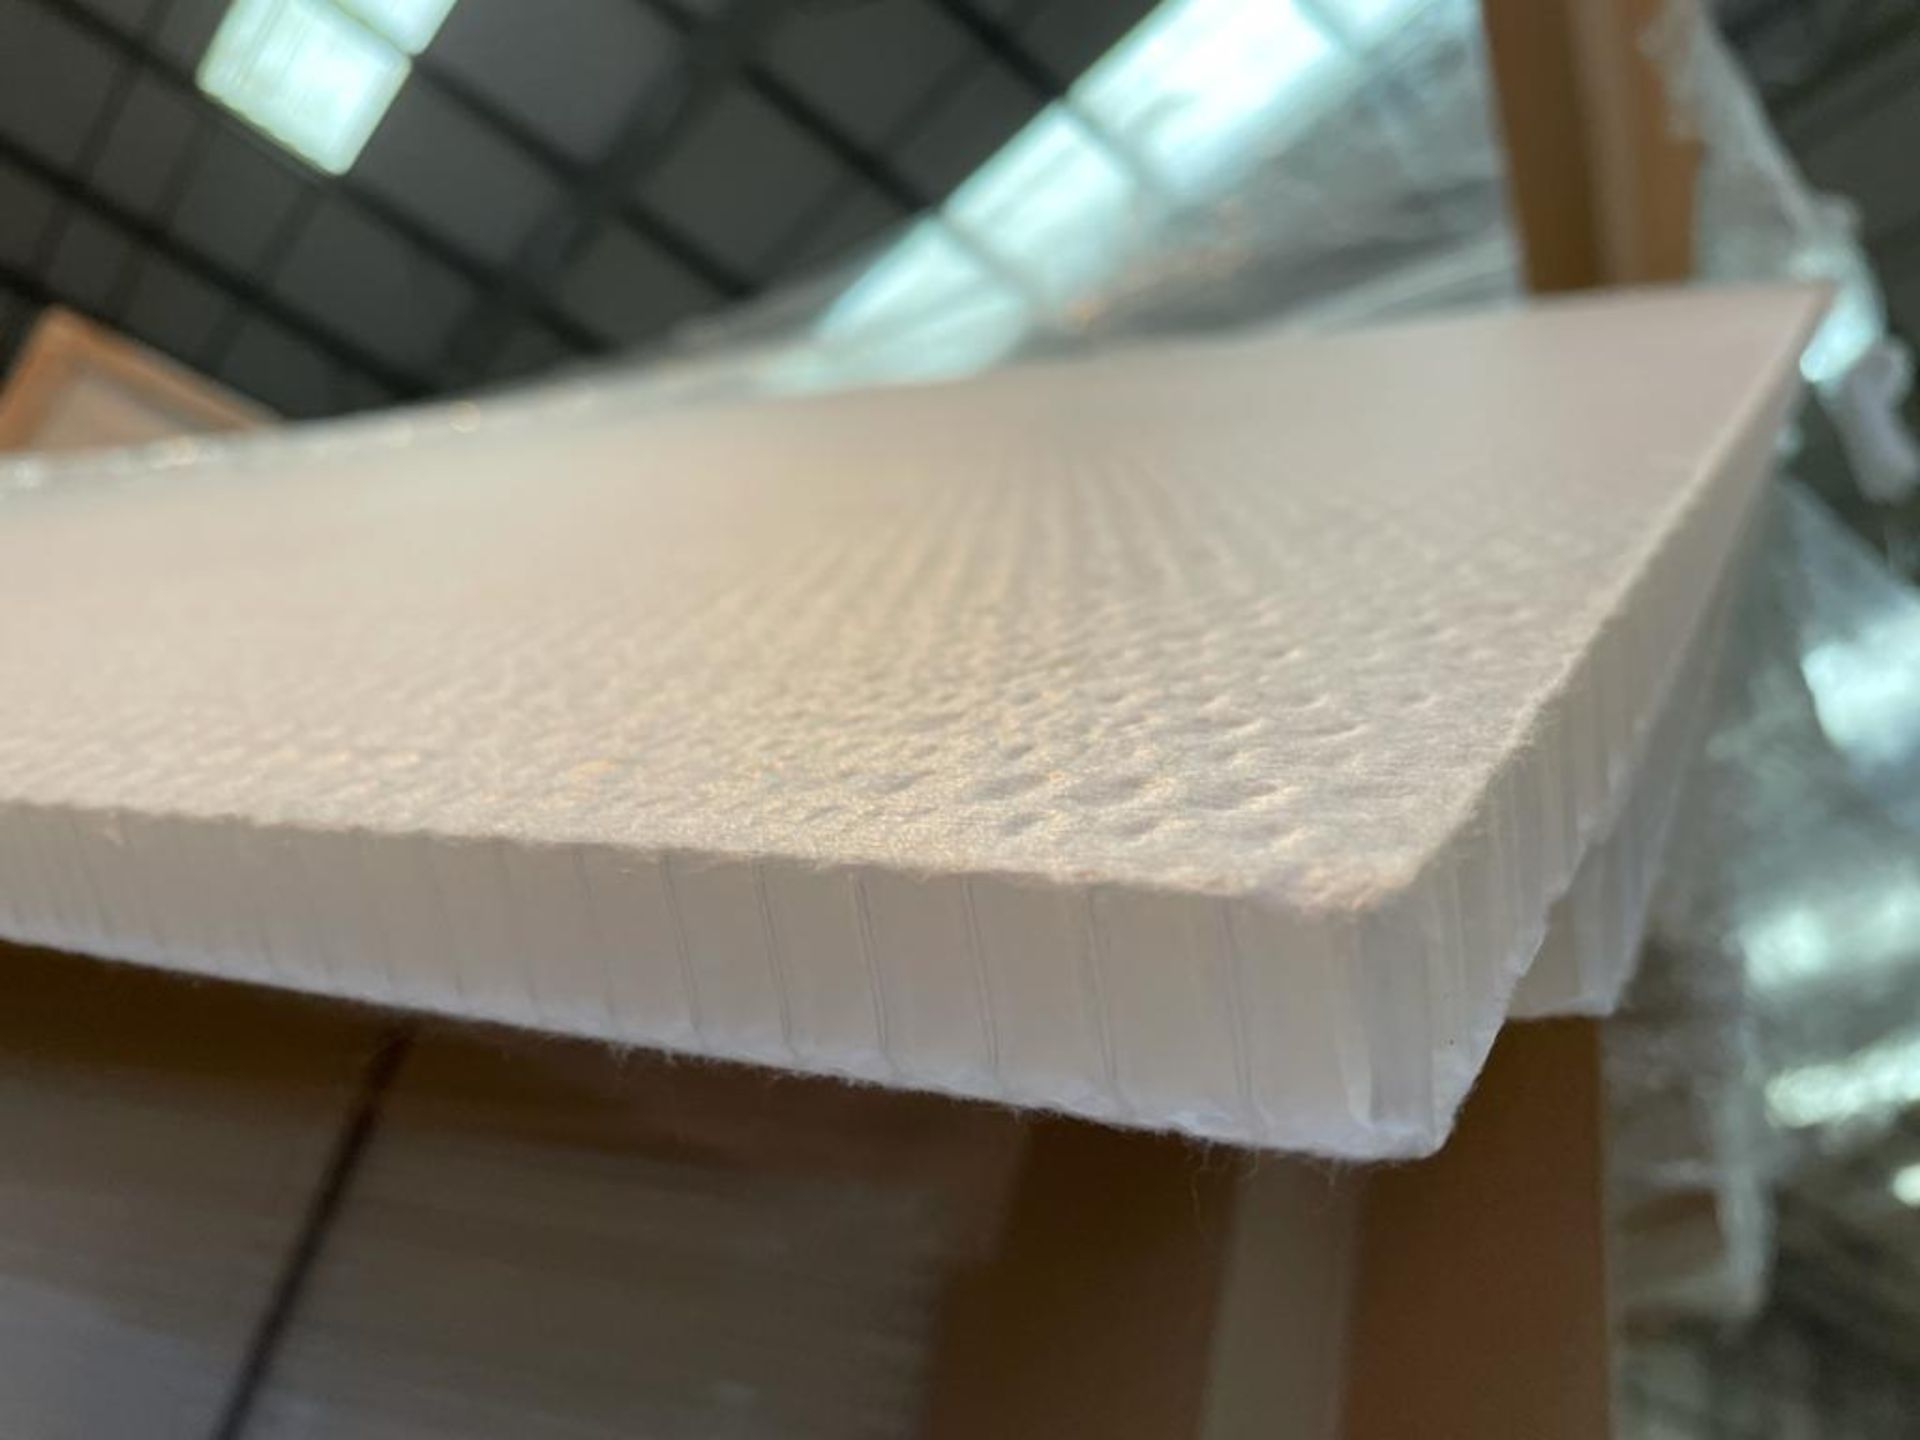 100 x ThermHex Thermoplastic Honeycomb Core Panels - Size: 3558 x 1215 x 20mm - New Stock - Lightwei - Image 3 of 7